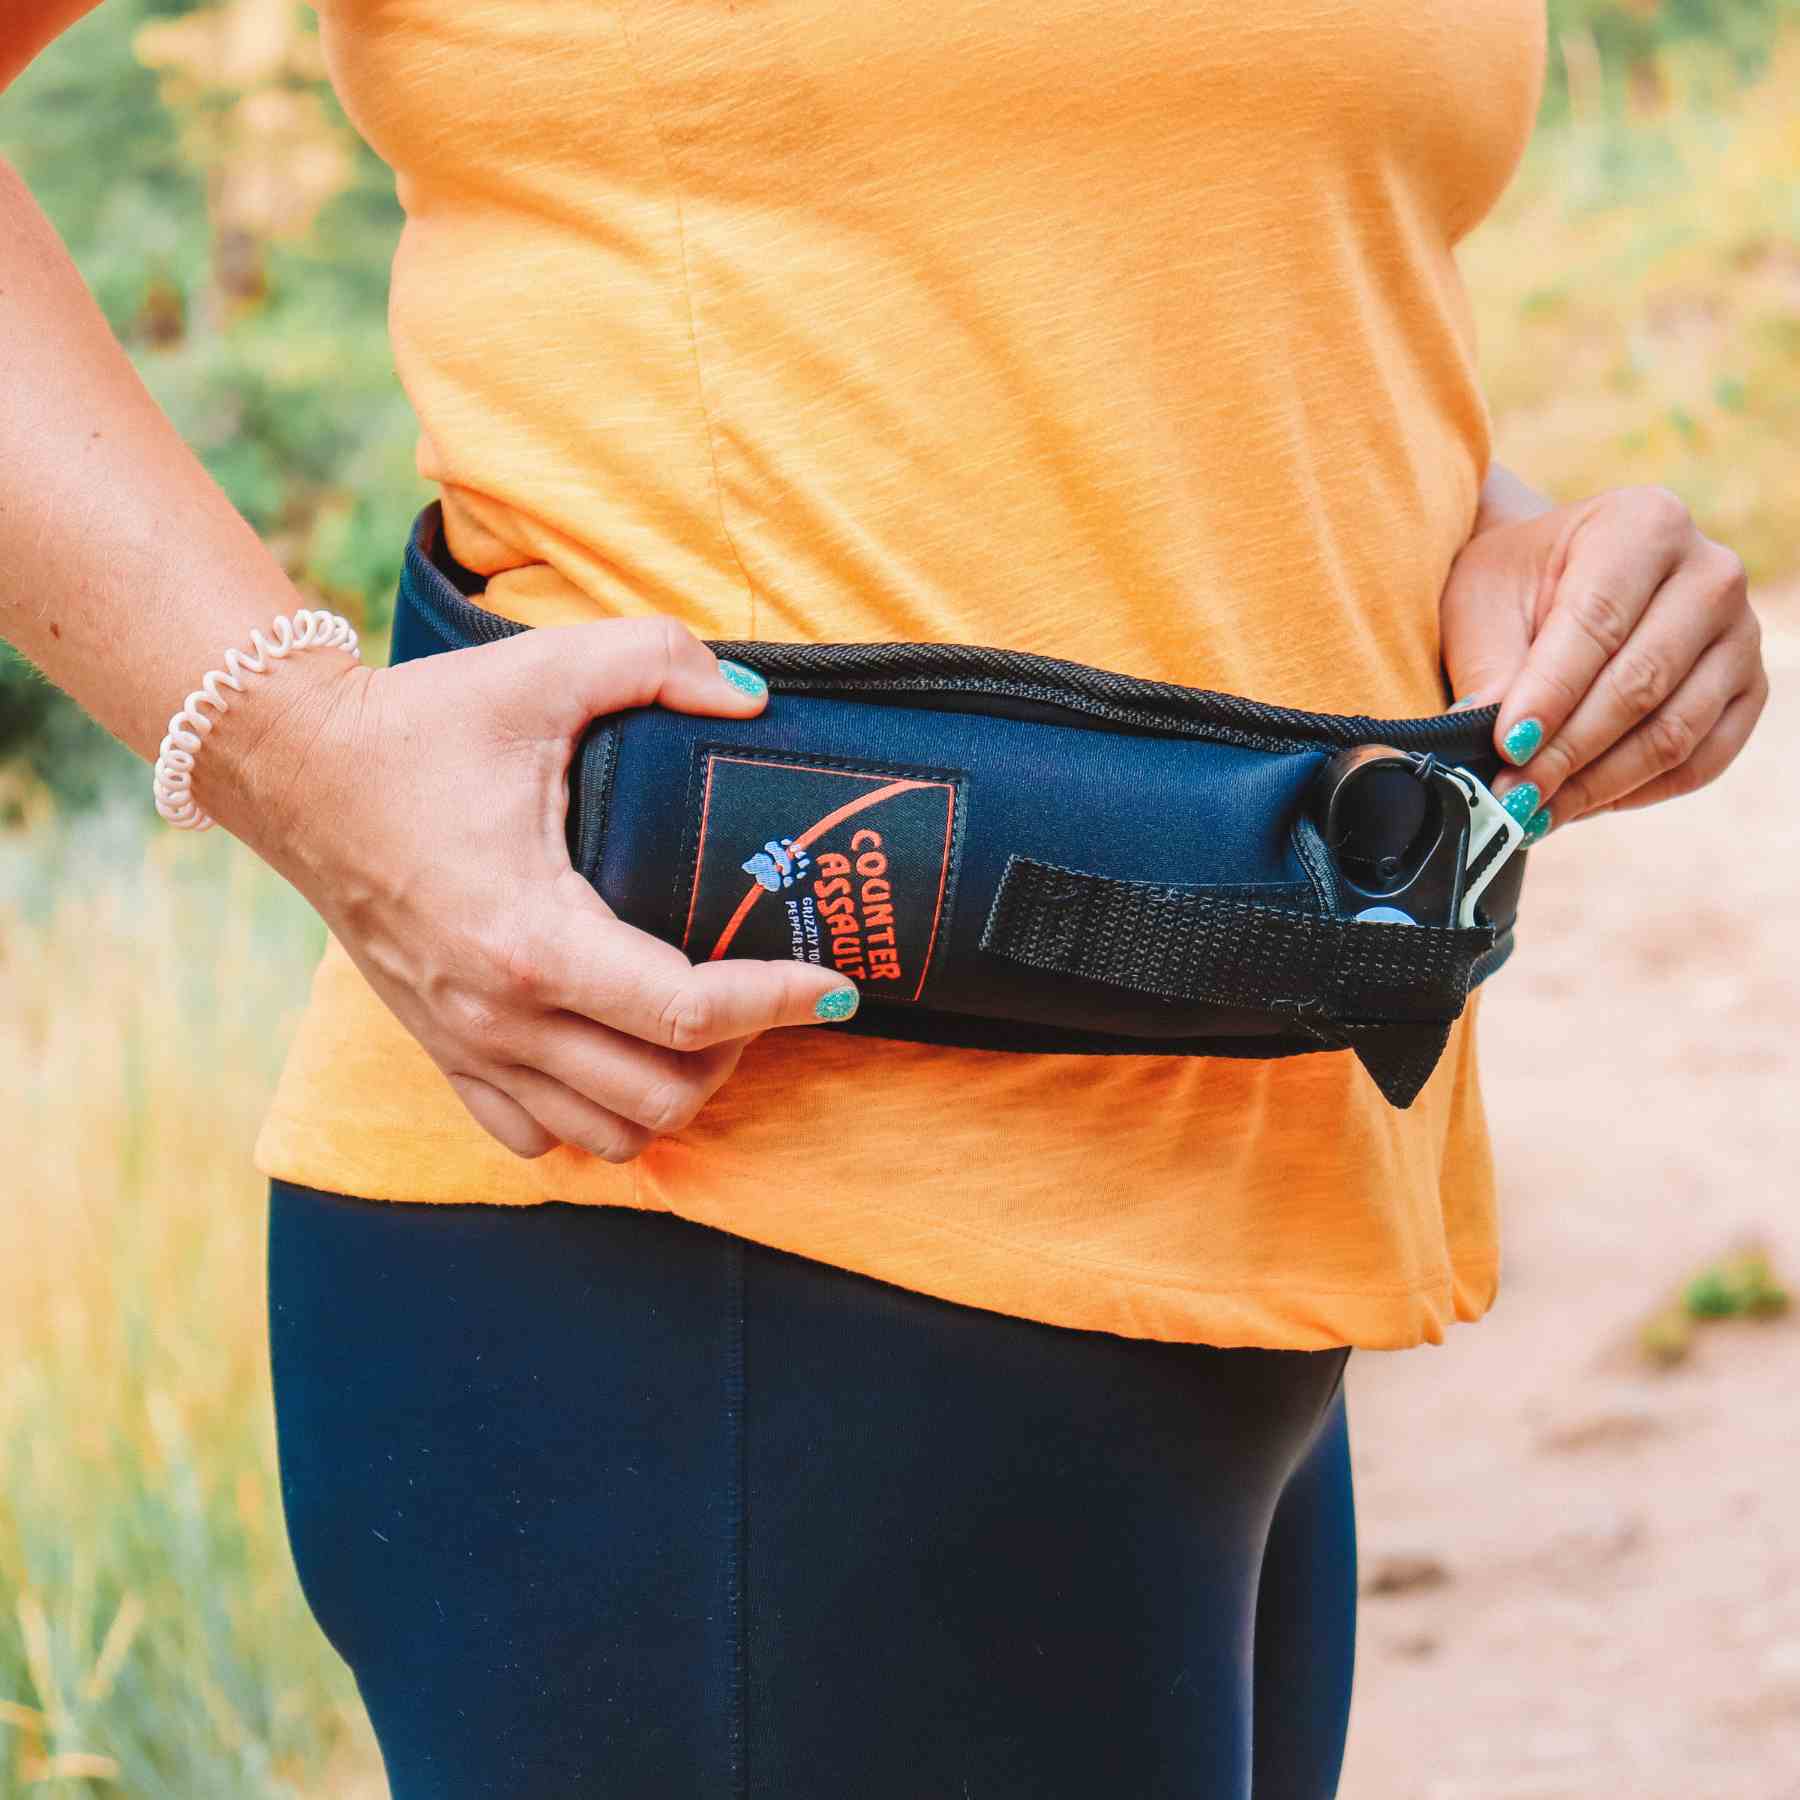 Woman adjusting the trail runner holster